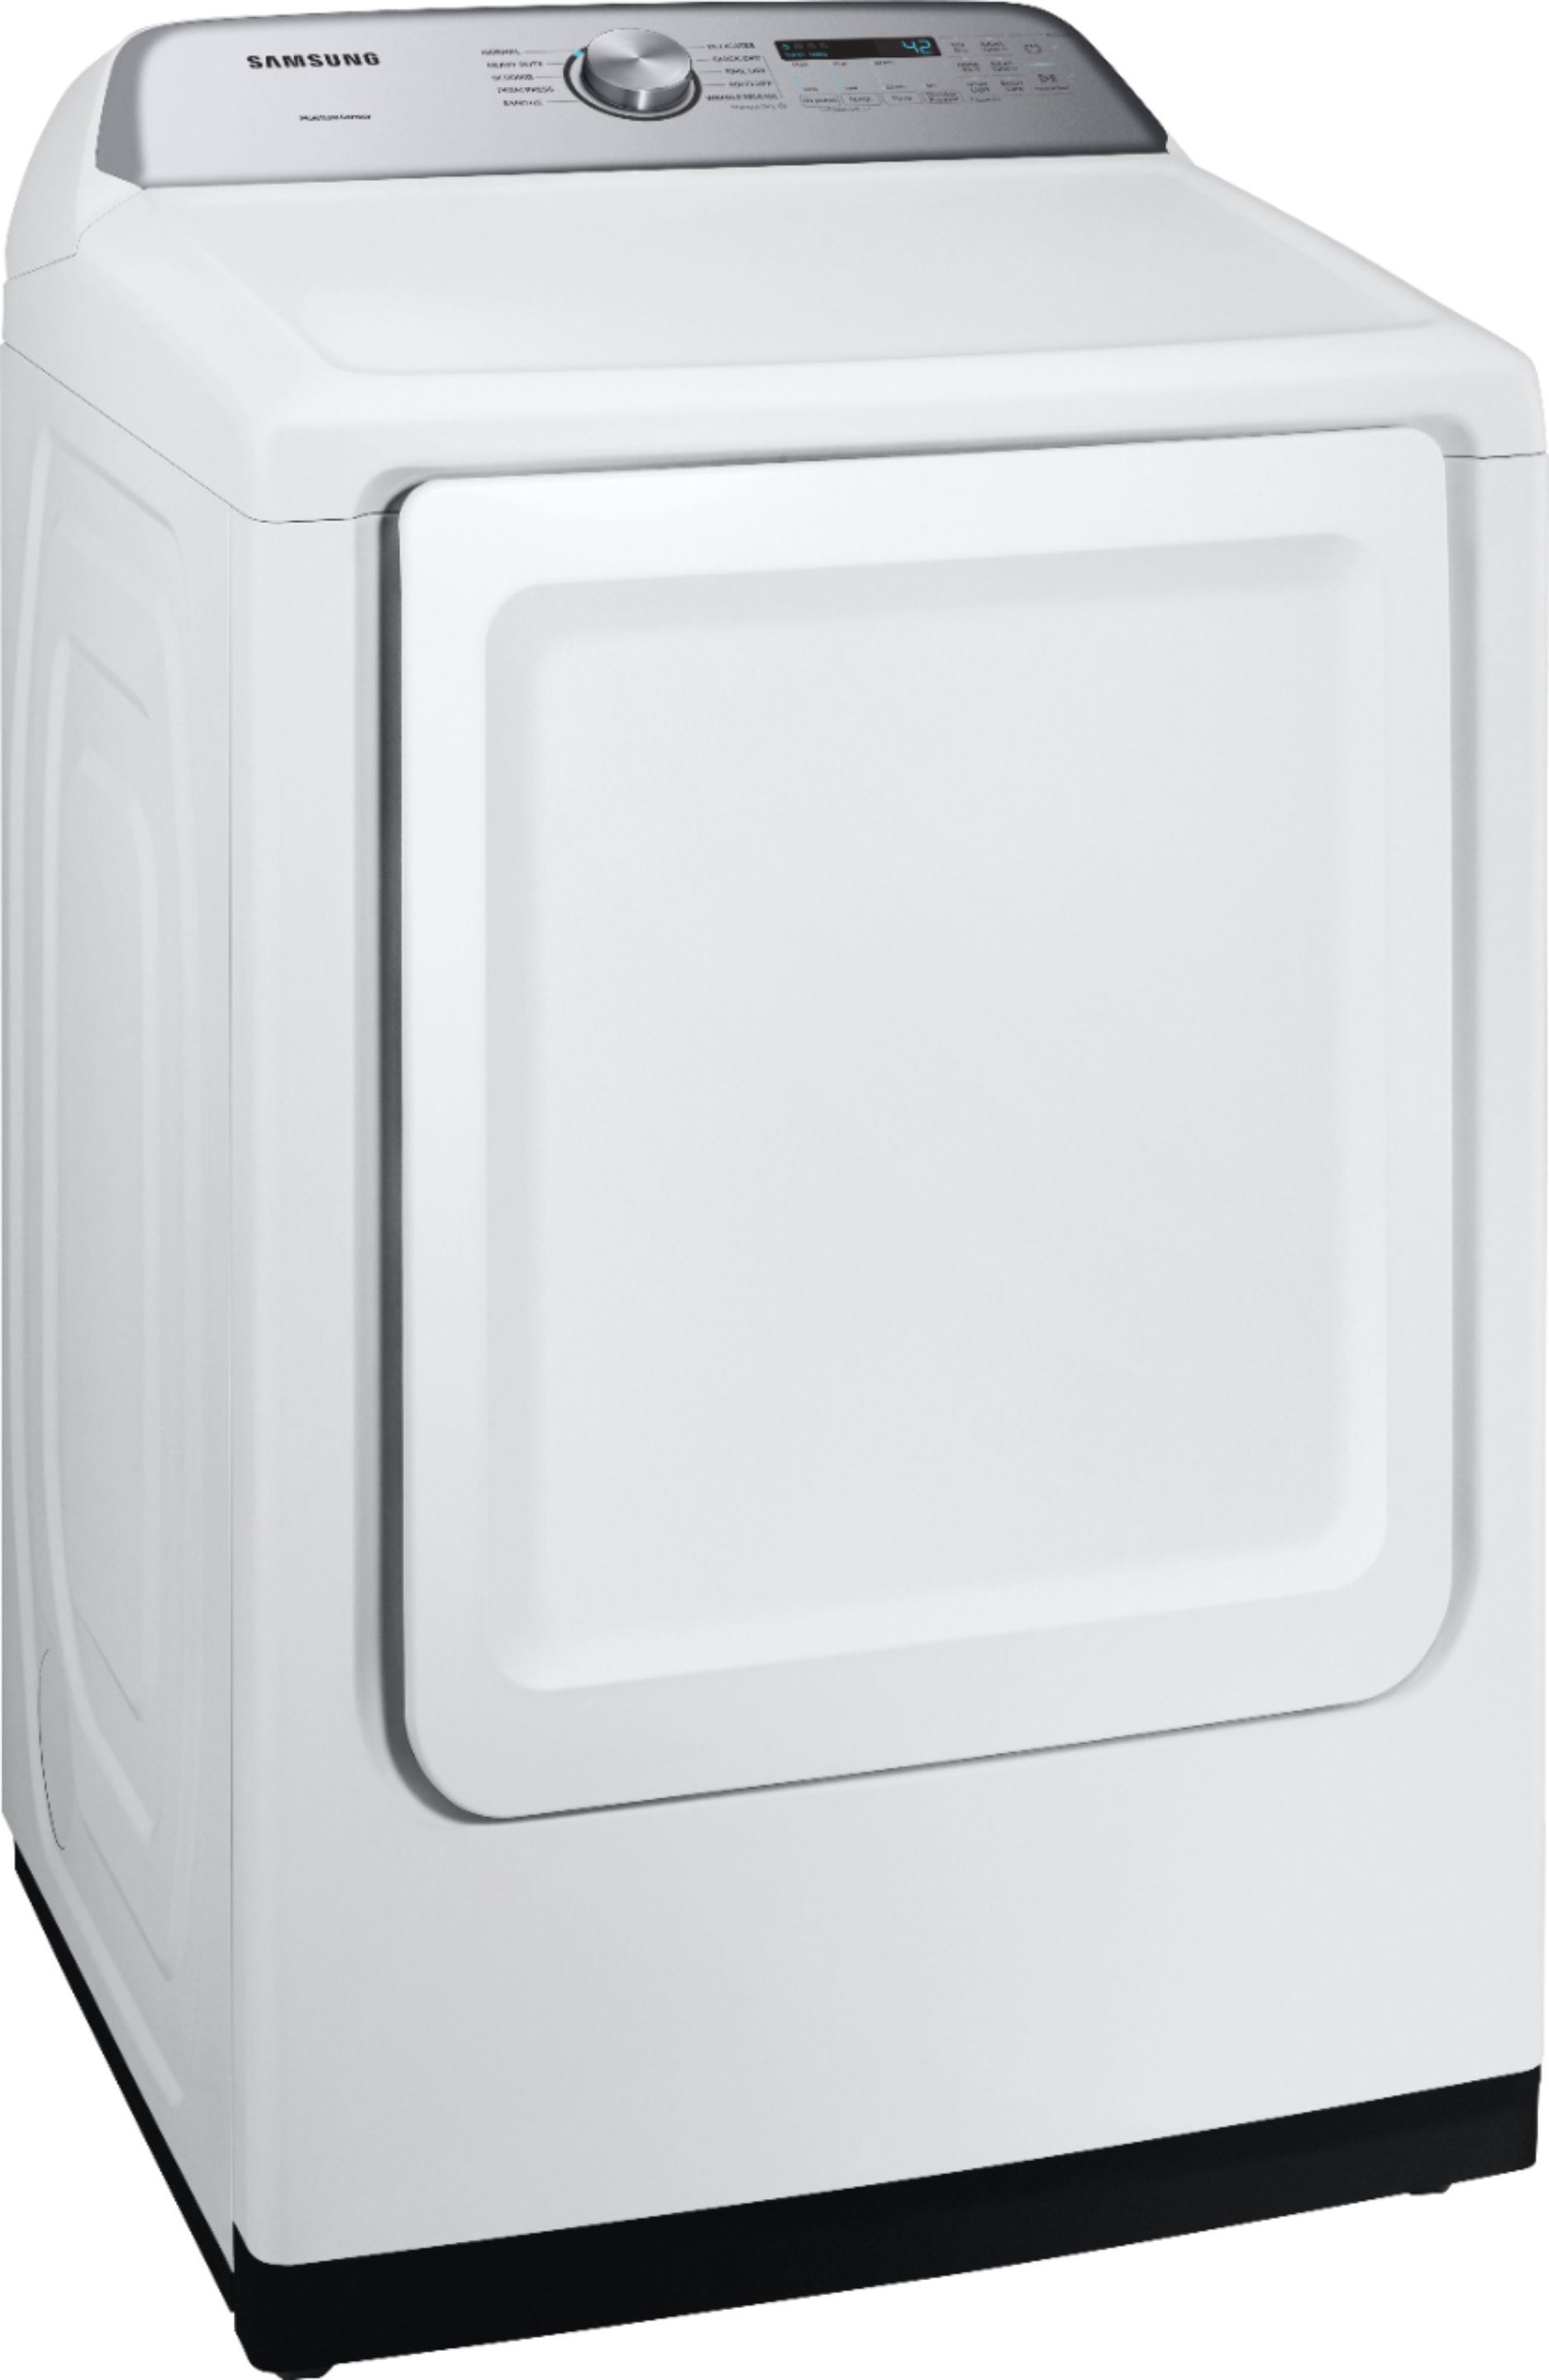 Angle View: Samsung - 7.4 Cu. Ft. Electric Dryer with Sensor Dry - White